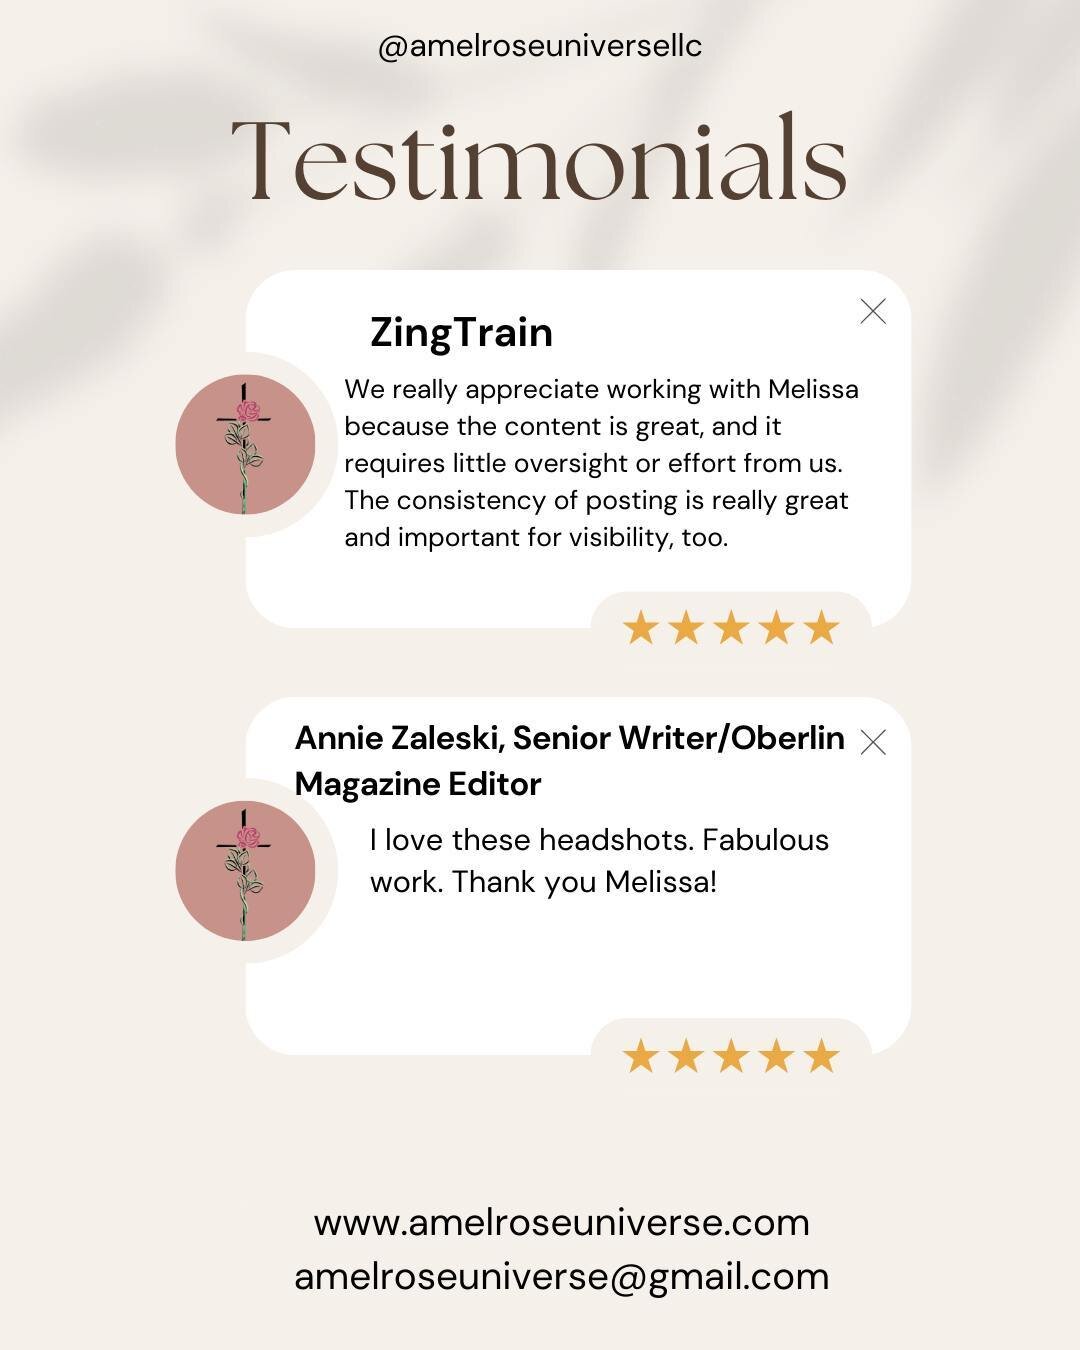 Feeling grateful for these amazing testimonials from my clients! 🙌 

It's incredibly rewarding to see the impact of our collaboration reflected in their words. From growing their online presence to boosting engagement, I'm dedicated to helping busin